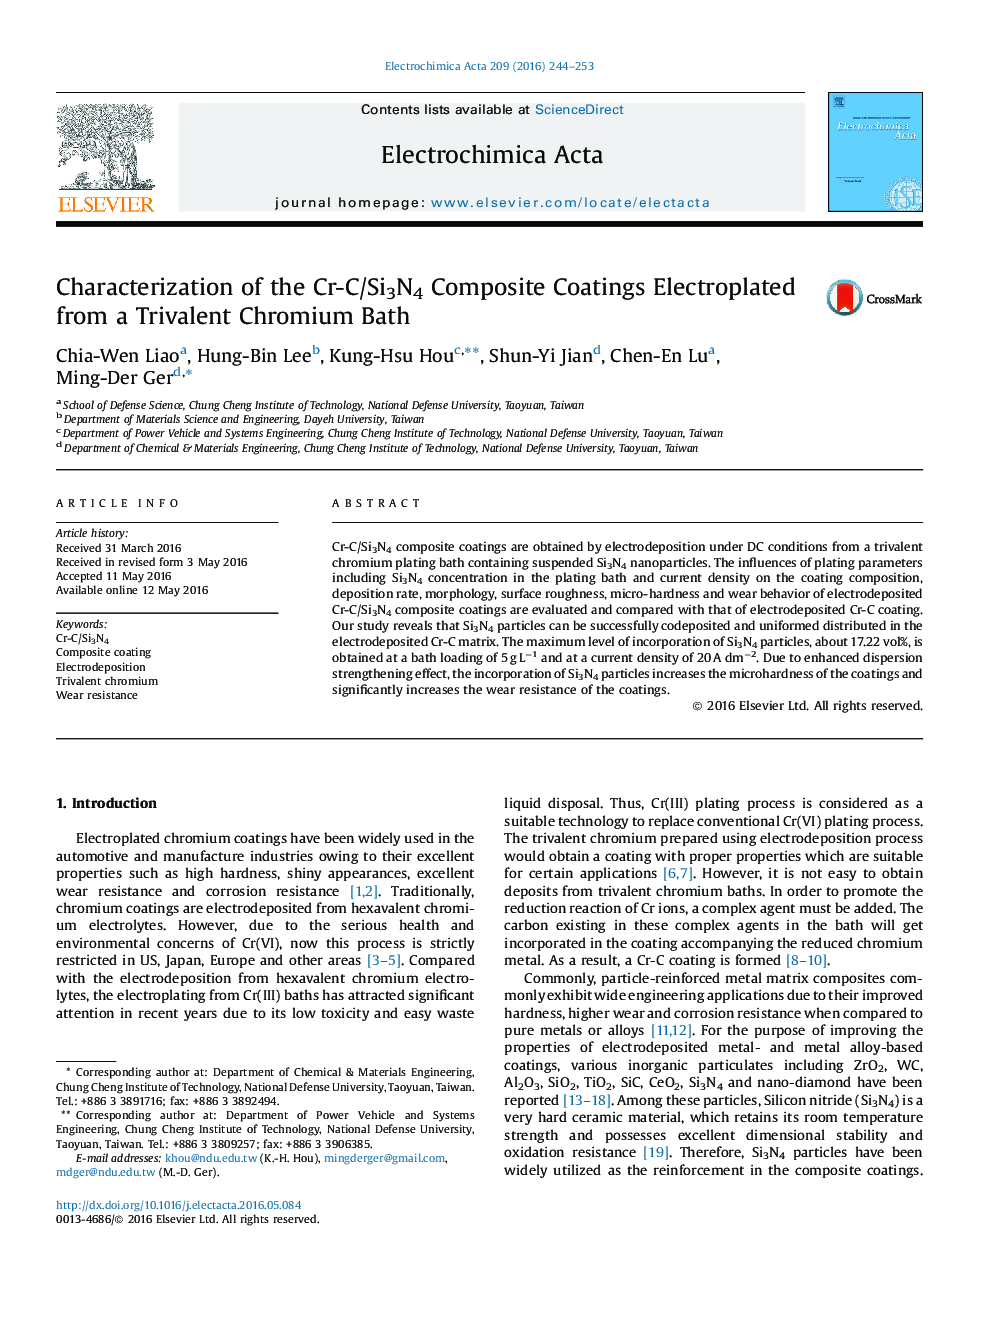 Characterization of the Cr-C/Si3N4 Composite Coatings Electroplated from a Trivalent Chromium Bath